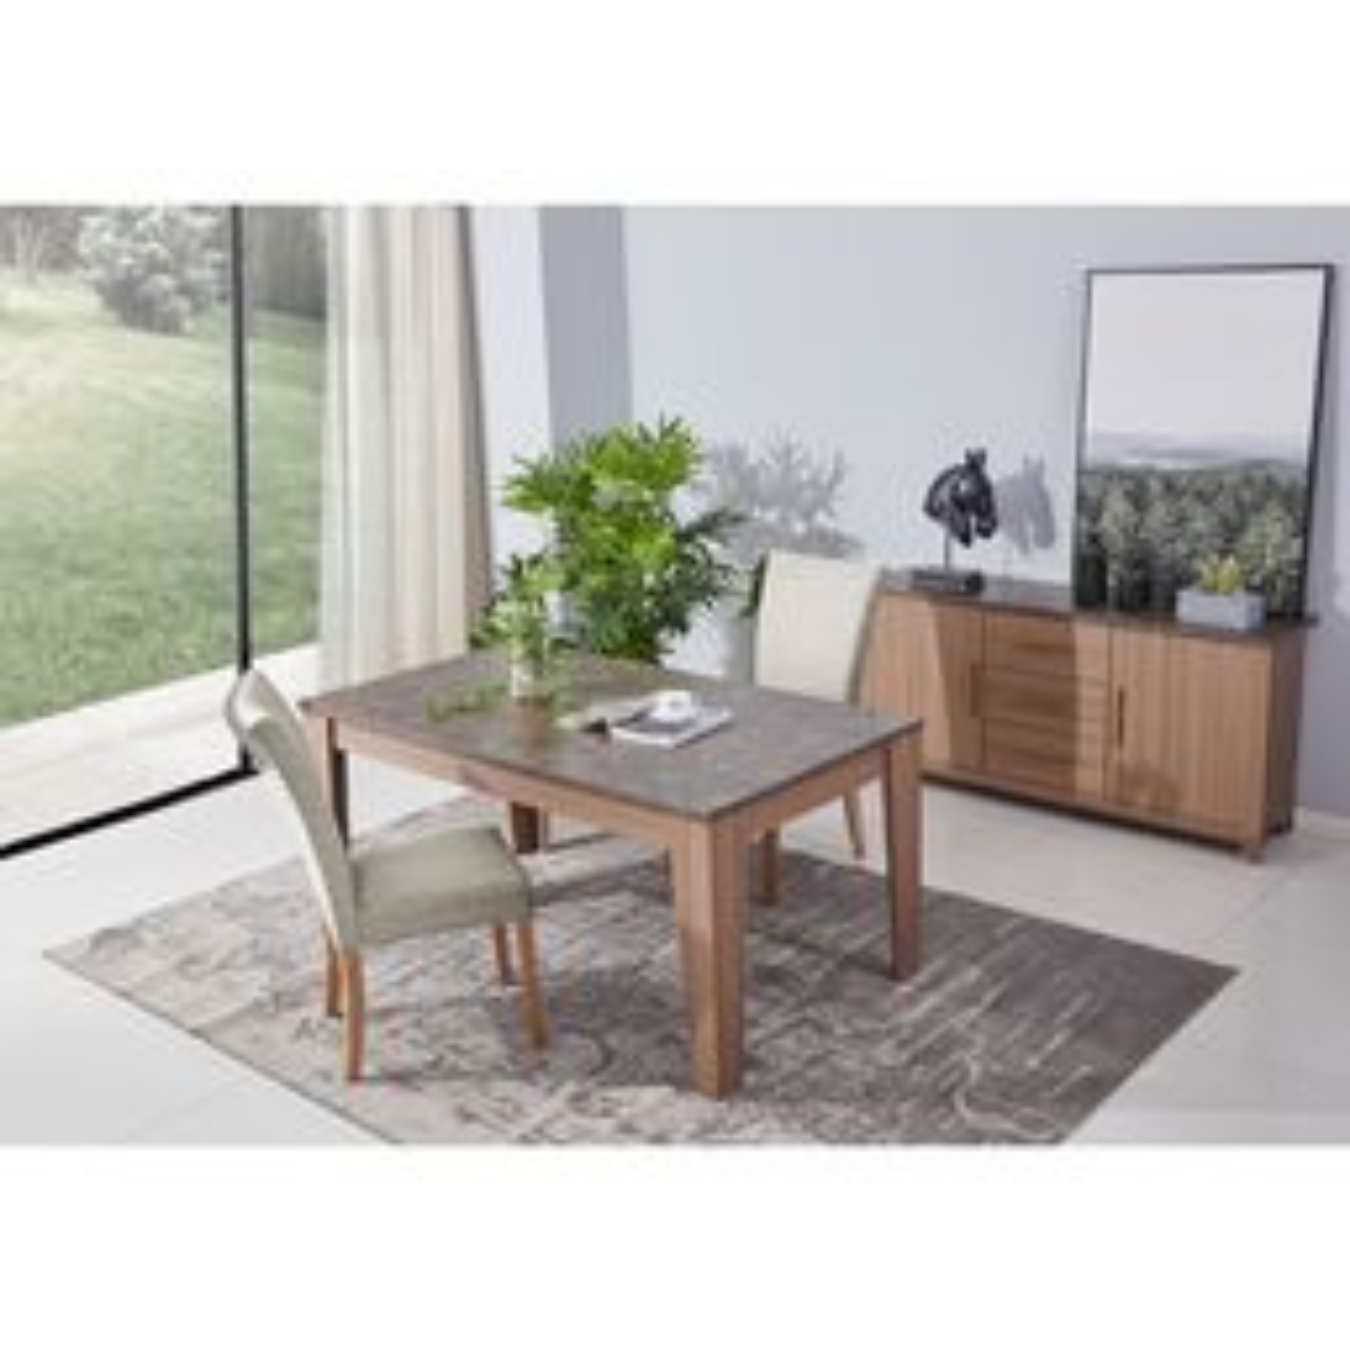 This ADAM GREY AND WALNUT 1.6 M DINING TABLE designed rectangle dining table is not just a piece of furniture, it can also be seen as a piece of art. It is beautiful.